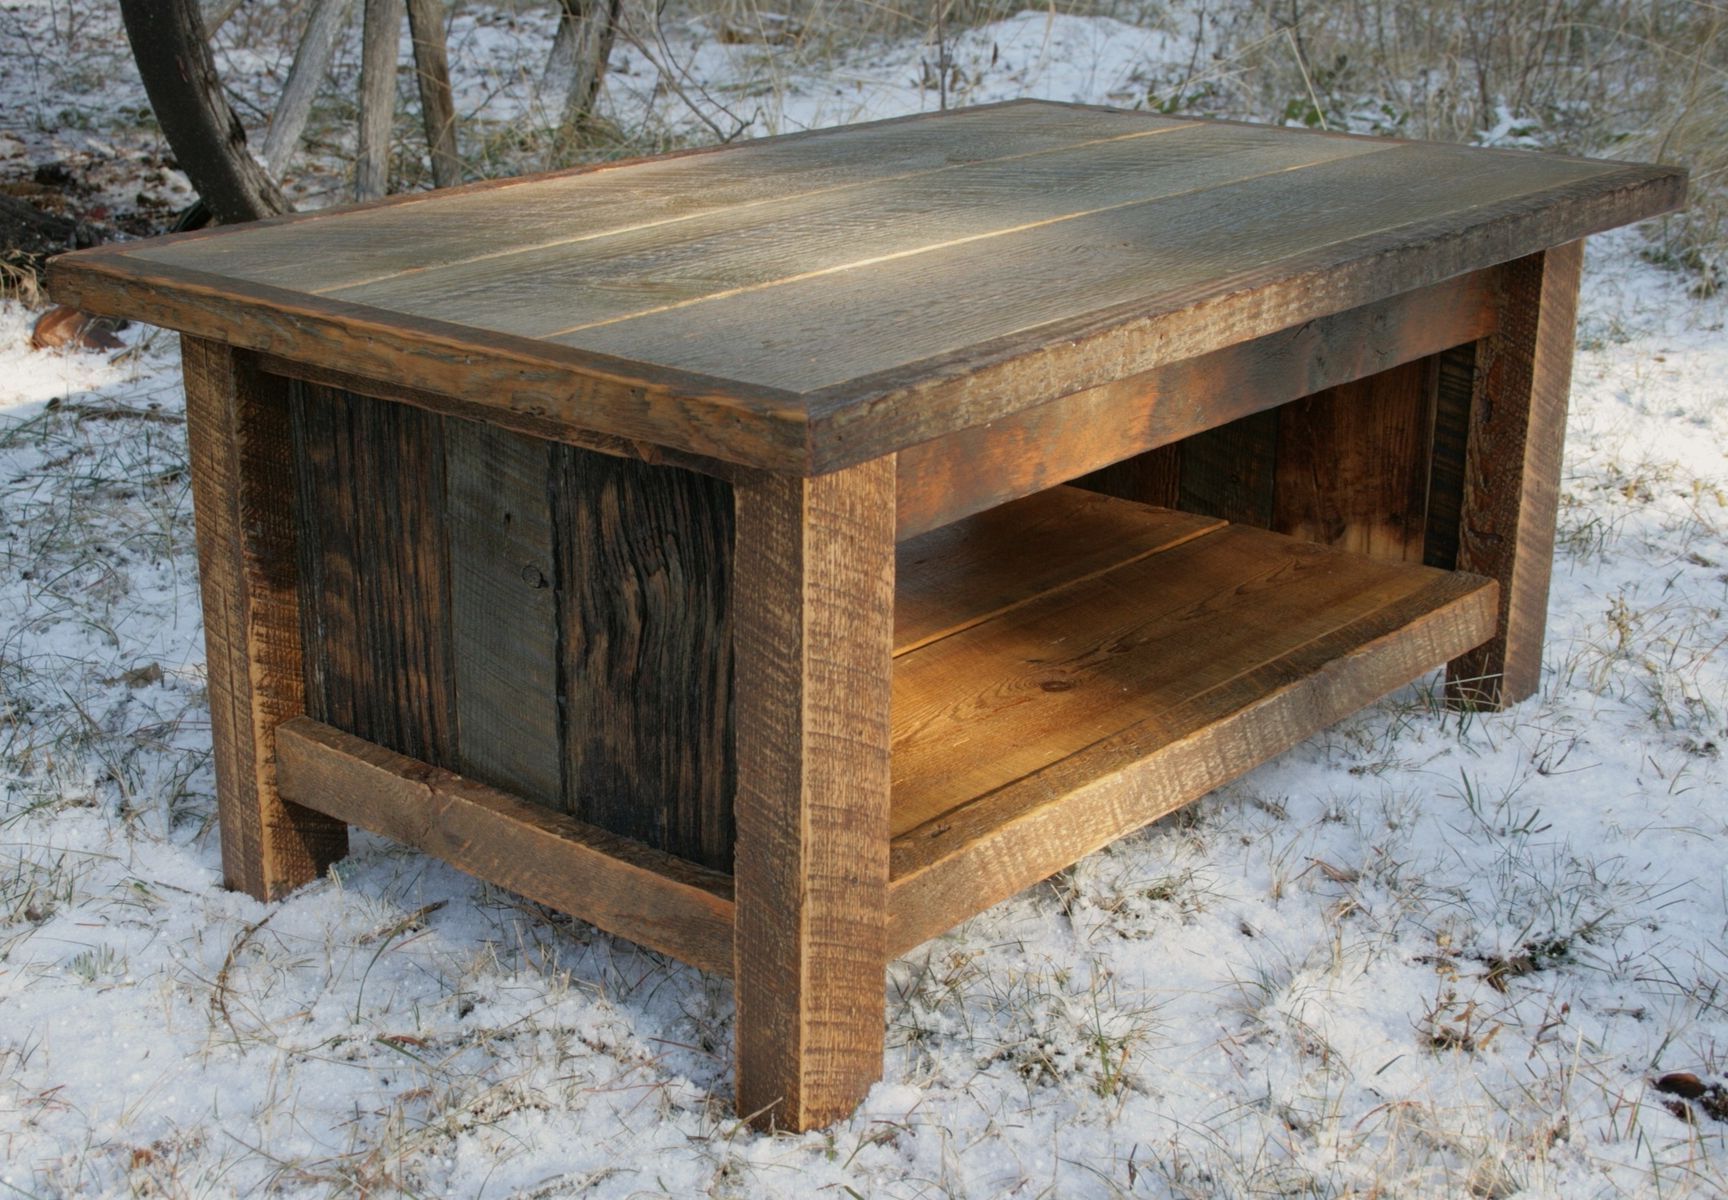 This Is A Custom Made Coffee Table Constructed Out Of Reclaimed Pertaining To Rustic Wood Coffee Tables (View 17 of 20)